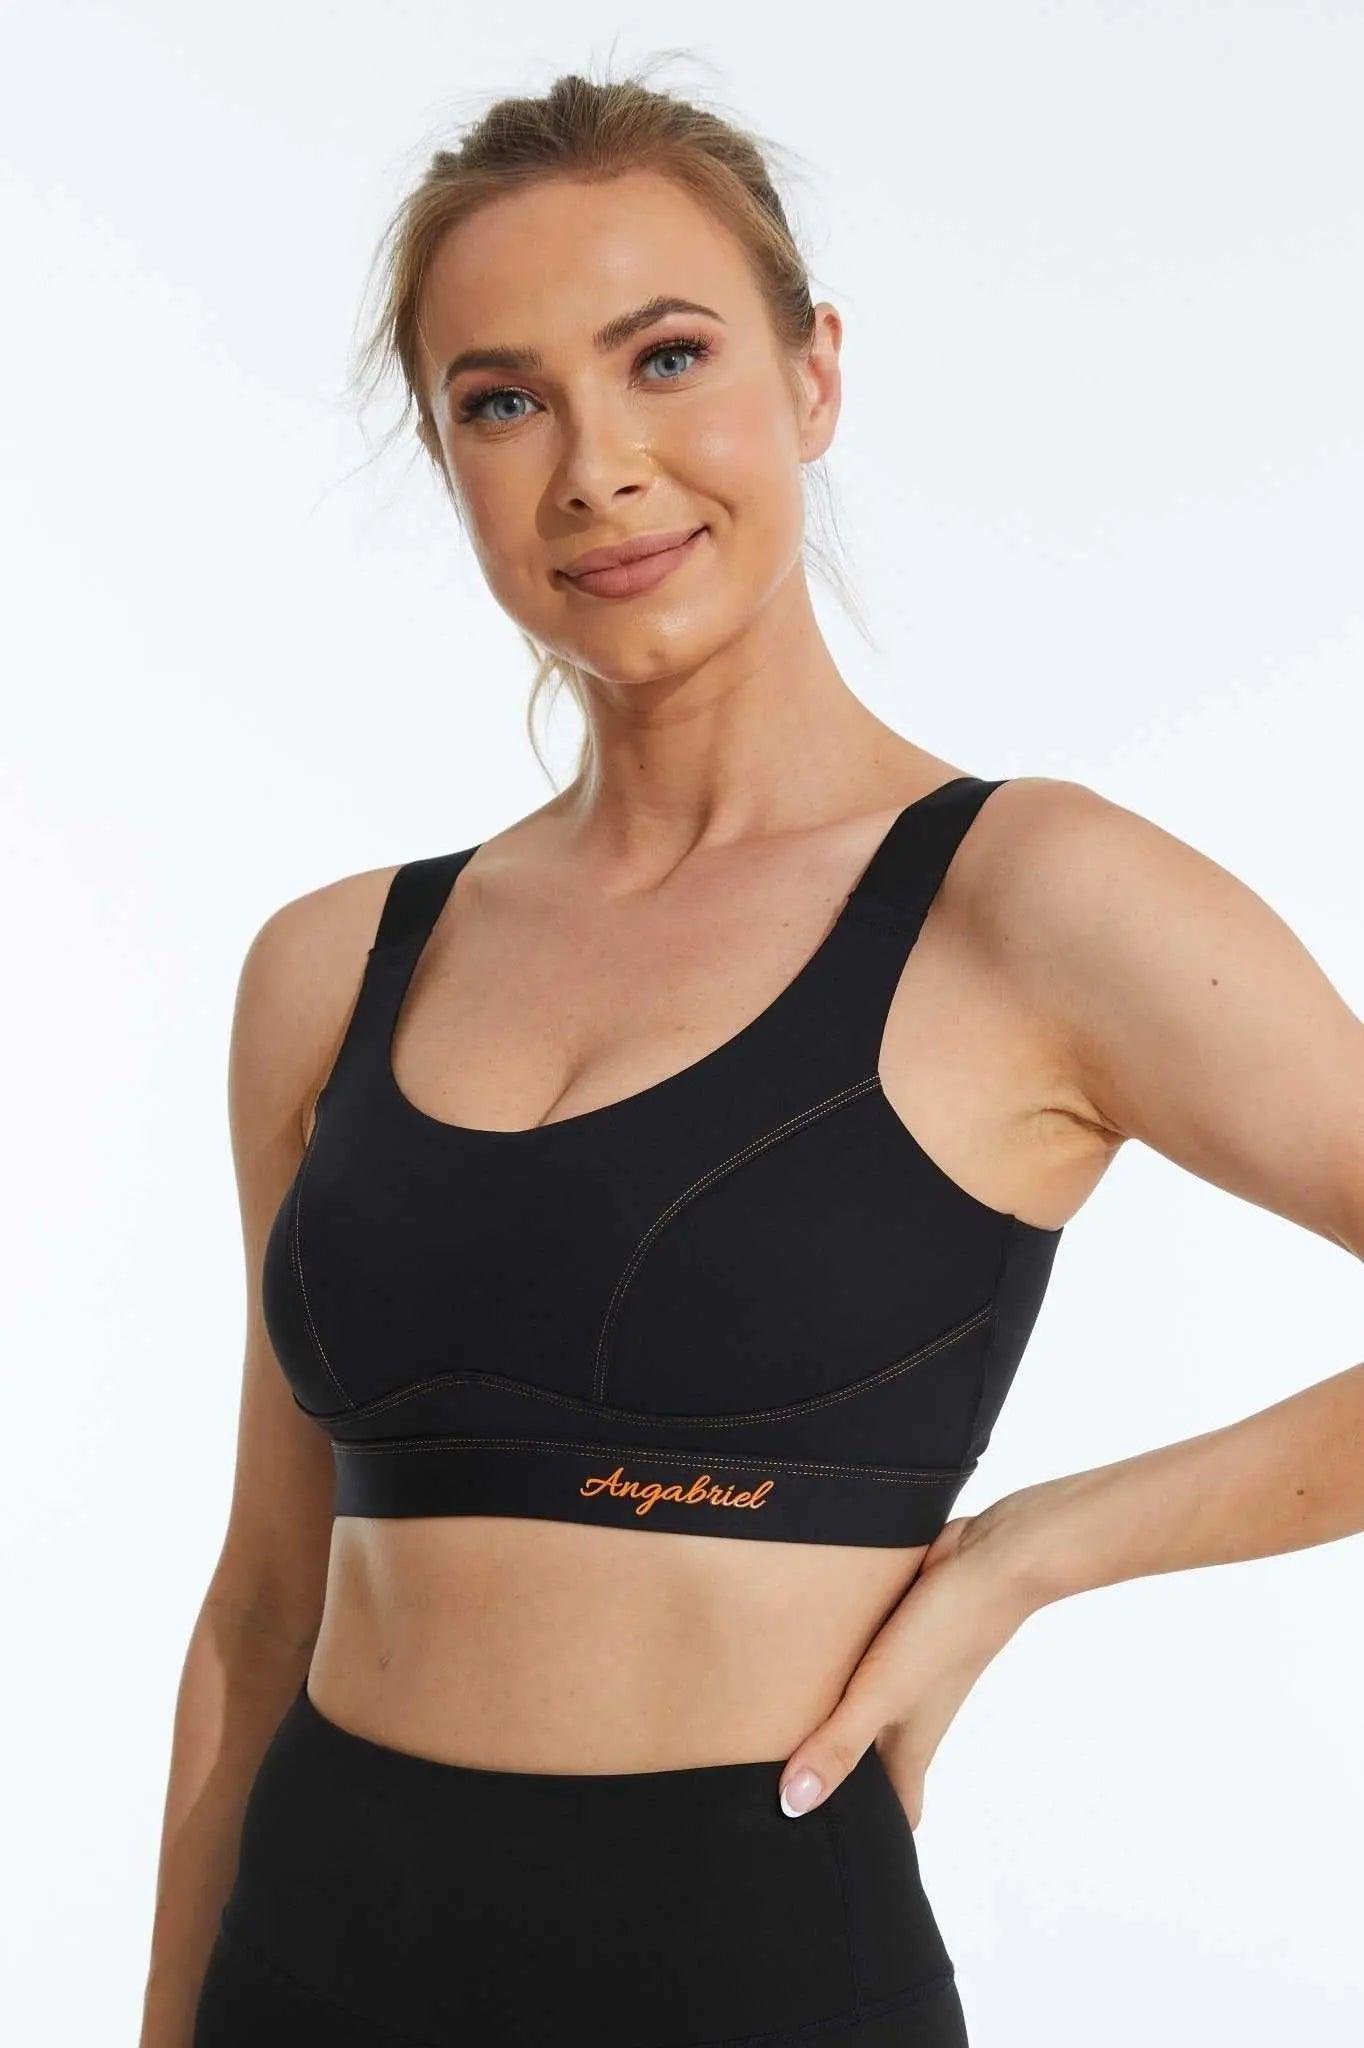 Wirefree Criss-Cross Back Adjustable Straps Sports Bra for Women